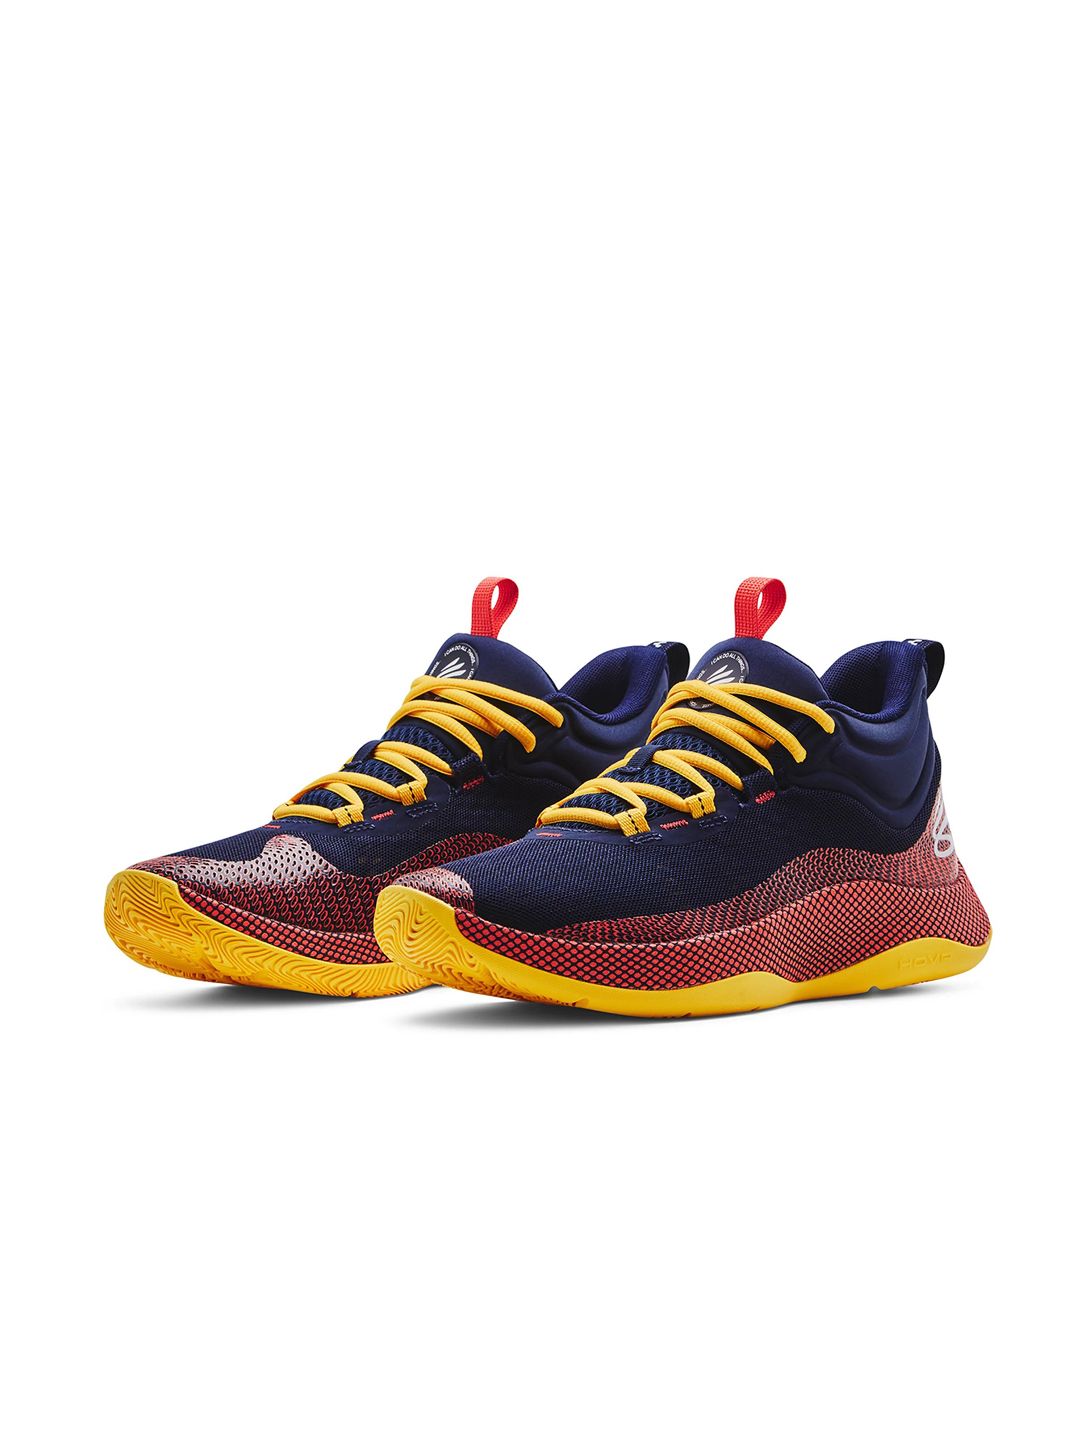 UNDER ARMOUR Unisex Navy Blue Solid Curry Hovr Splash Regular Basketball Shoes Price in India